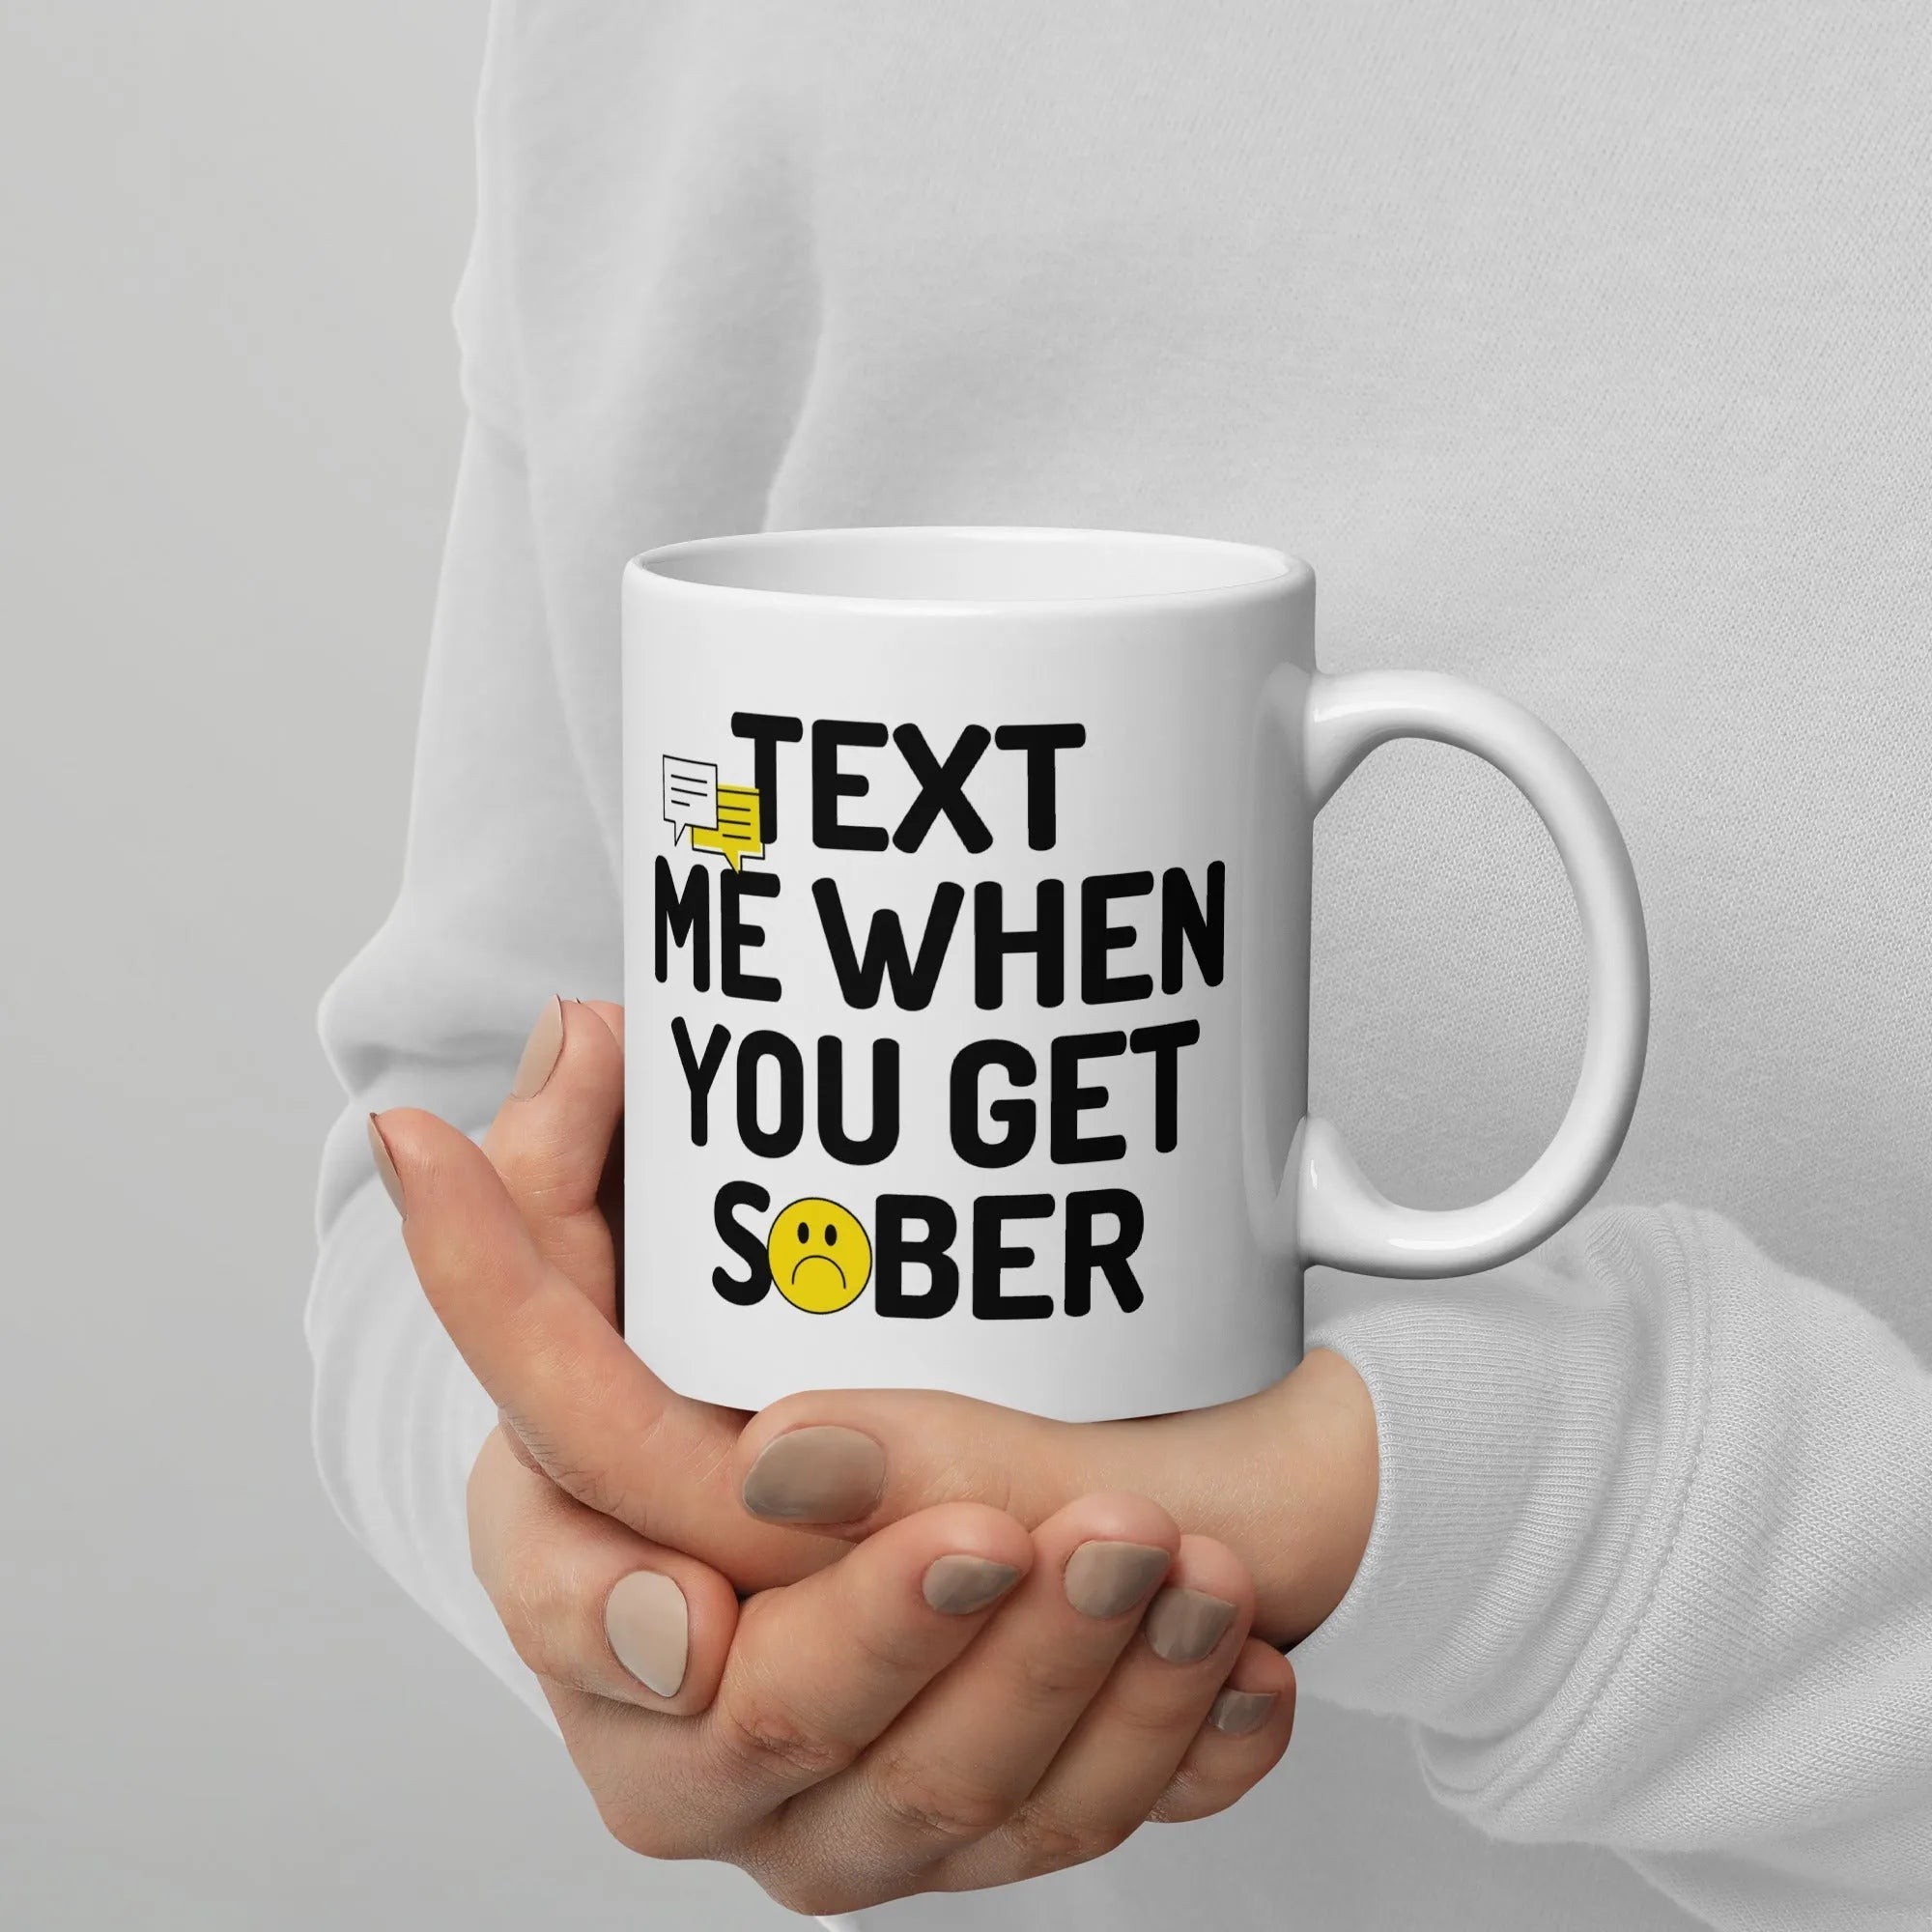 Text Me When You Get Sober - White glossy mug - Sobervation